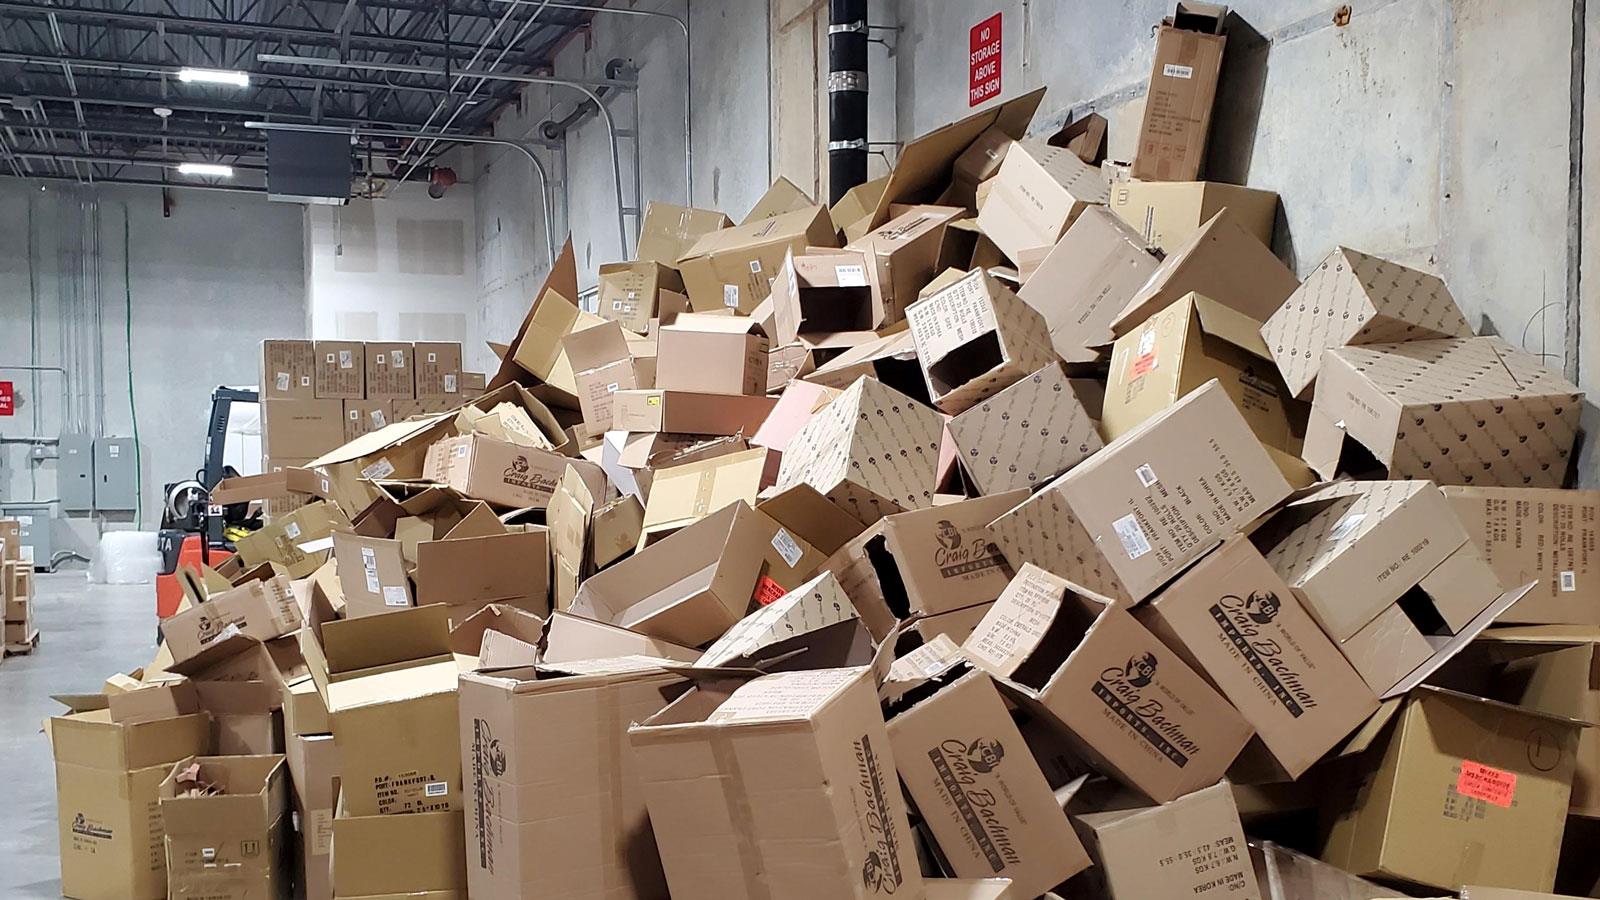 Warehouse full of empty cardboard boxes in a big pile